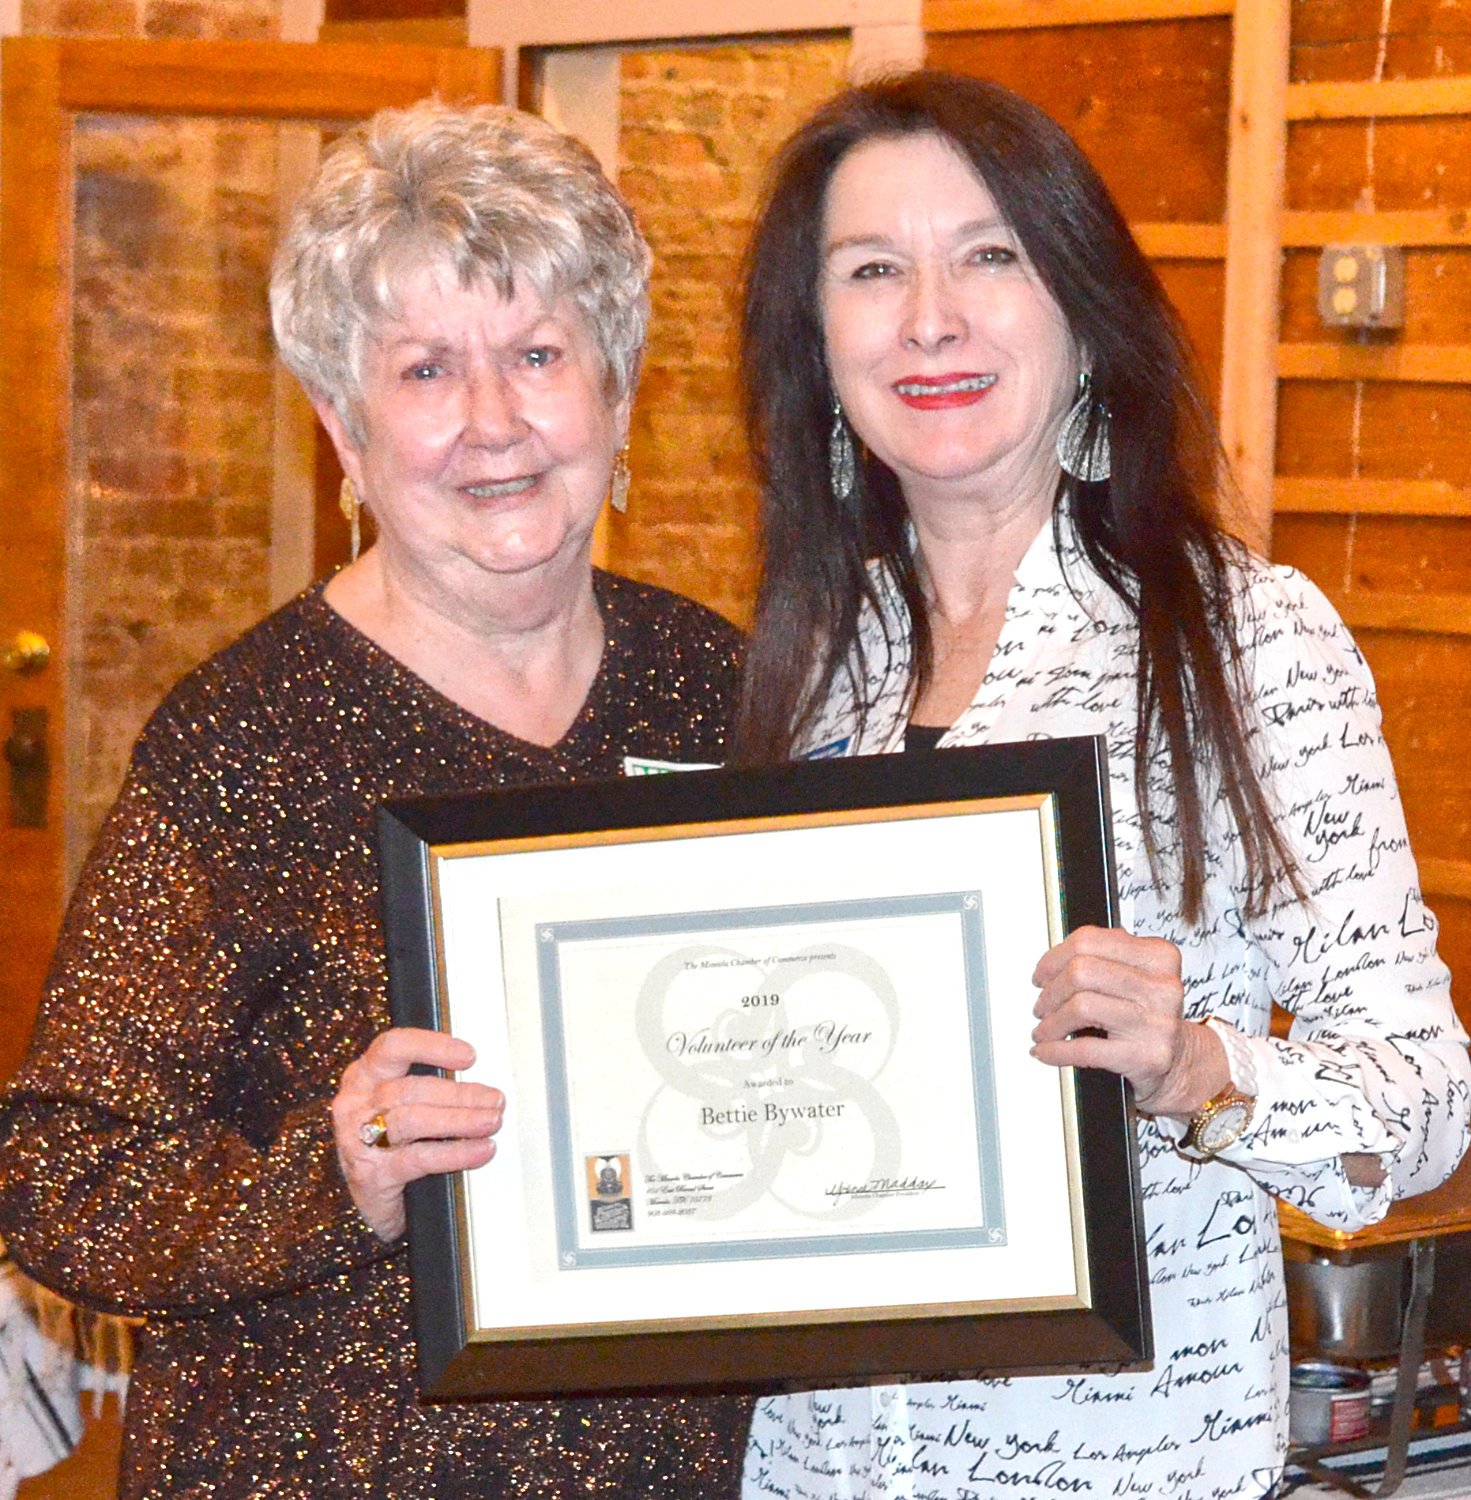 Mineola Chamber of Commerce President Yvonne Maddox, right, congratulates Betty Bywater on being named the chamber’s top volunteer for 2019 during the annual awards dinner last Thursday.